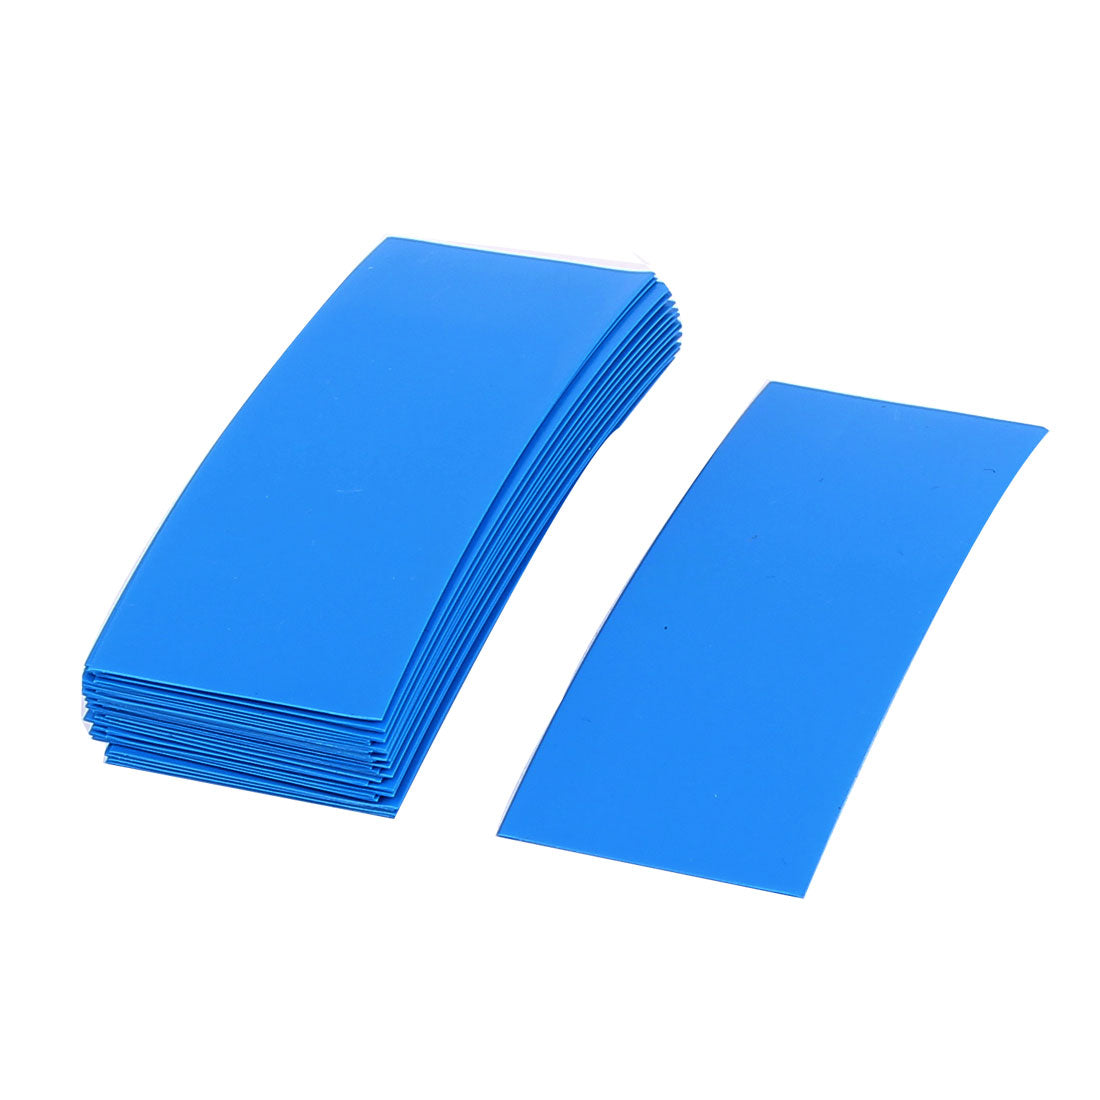 uxcell Uxcell 30pcs PVC Heat Shrink Tubing Blue for 1 x 18650 Battery